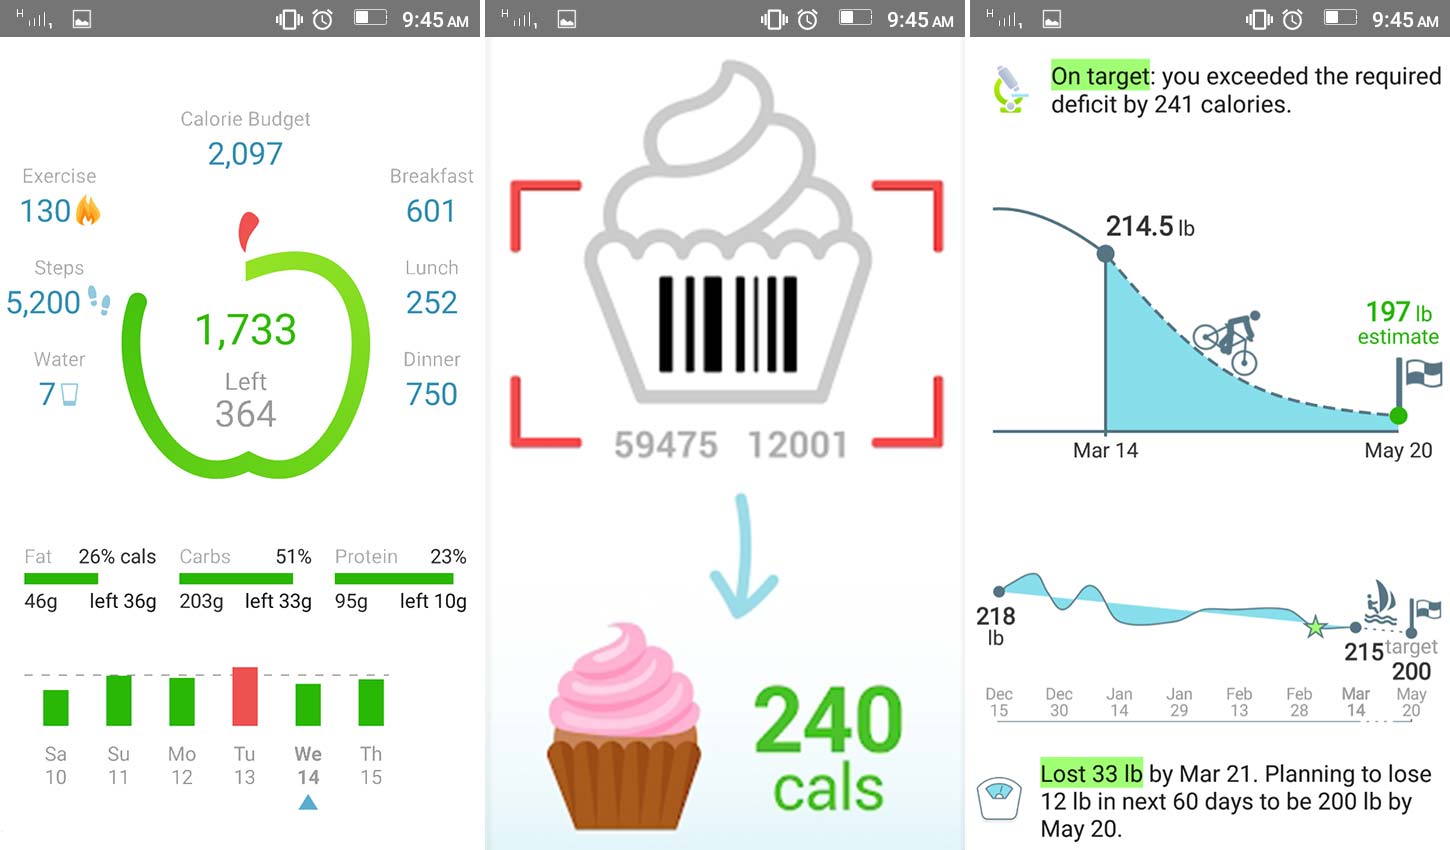 15 Best Calorie Counter Apps You Can Use in 2020